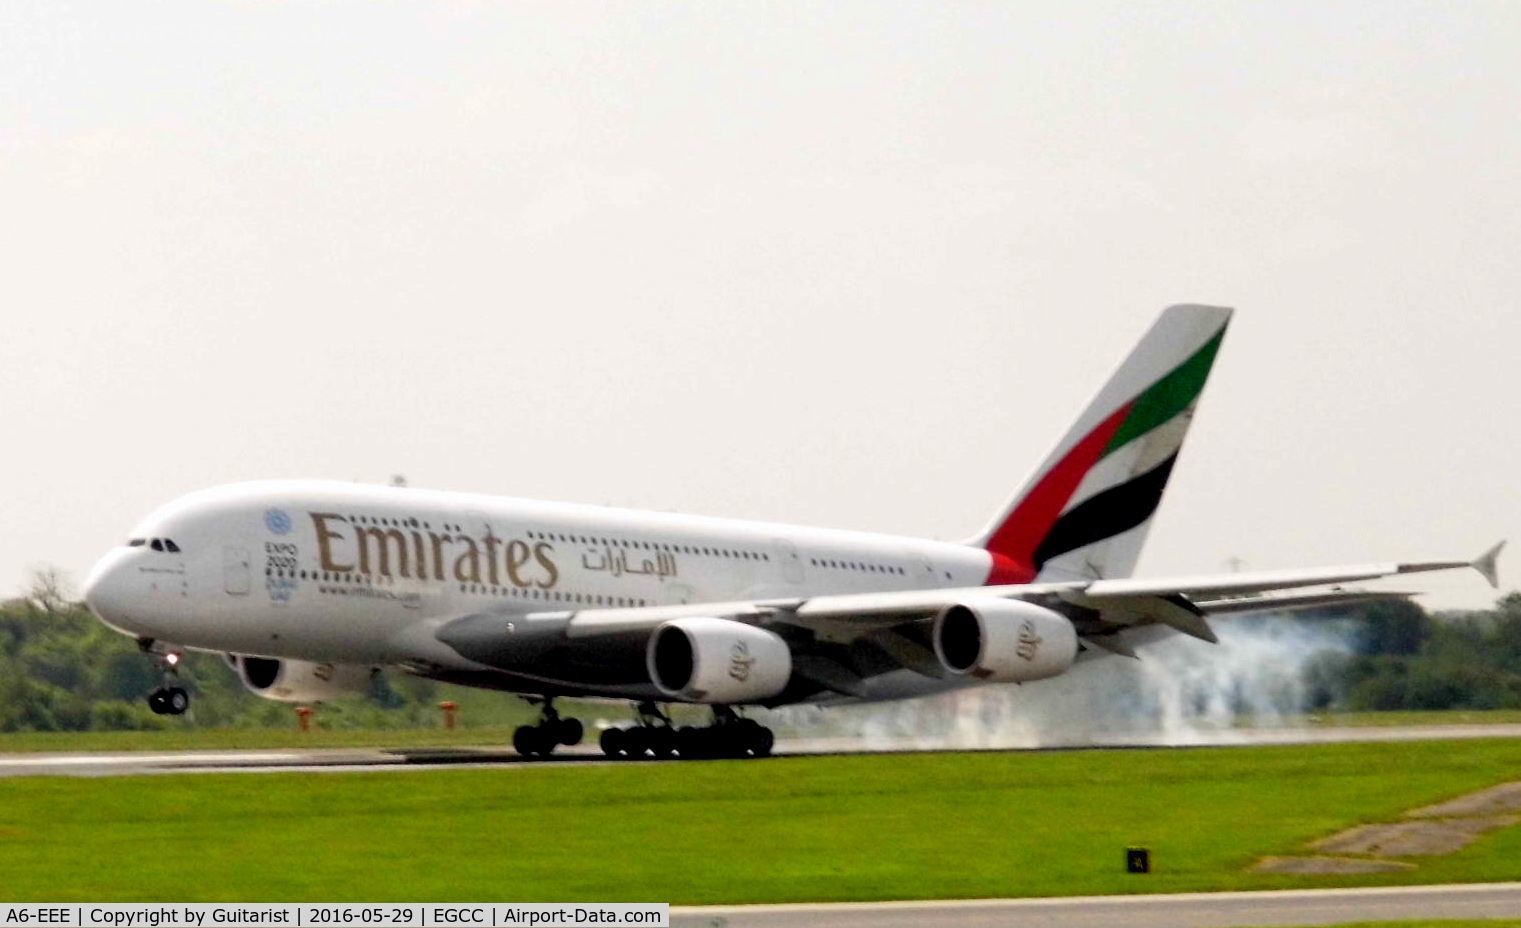 A6-EEE, 2012 Airbus A380-861 C/N 112, At Manchester